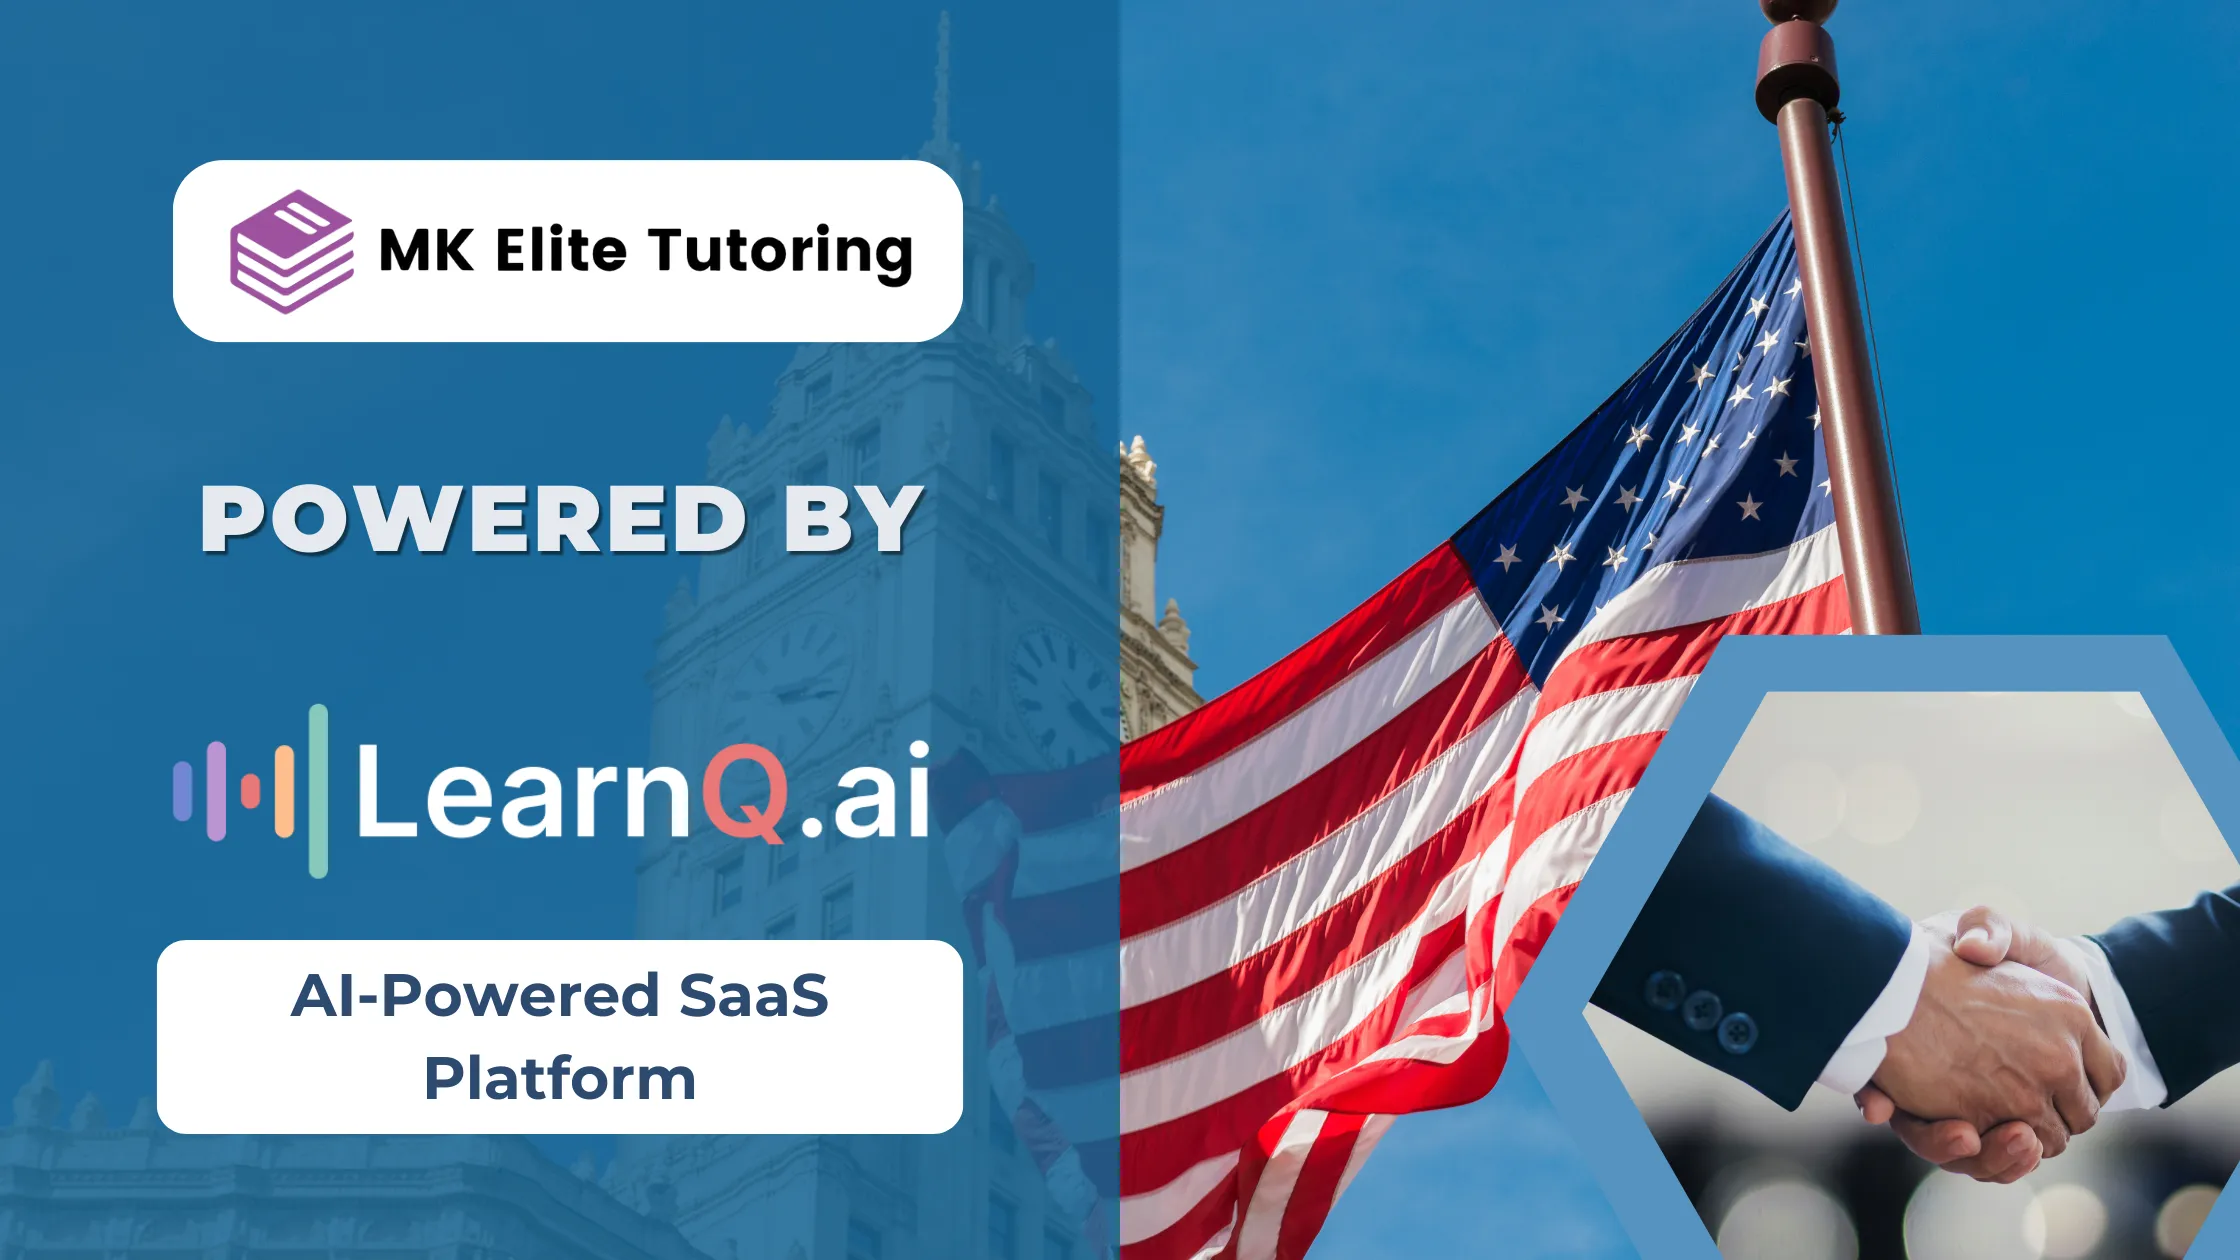 Discover how MK Elite Tutoring, in collaboration with LearnQ.ai, is transforming SAT preparation with AI-driven diagnostics, adaptive learning, and personalized tutoring. Achieve unparalleled success with our innovative approach to mastering the Digital SAT.